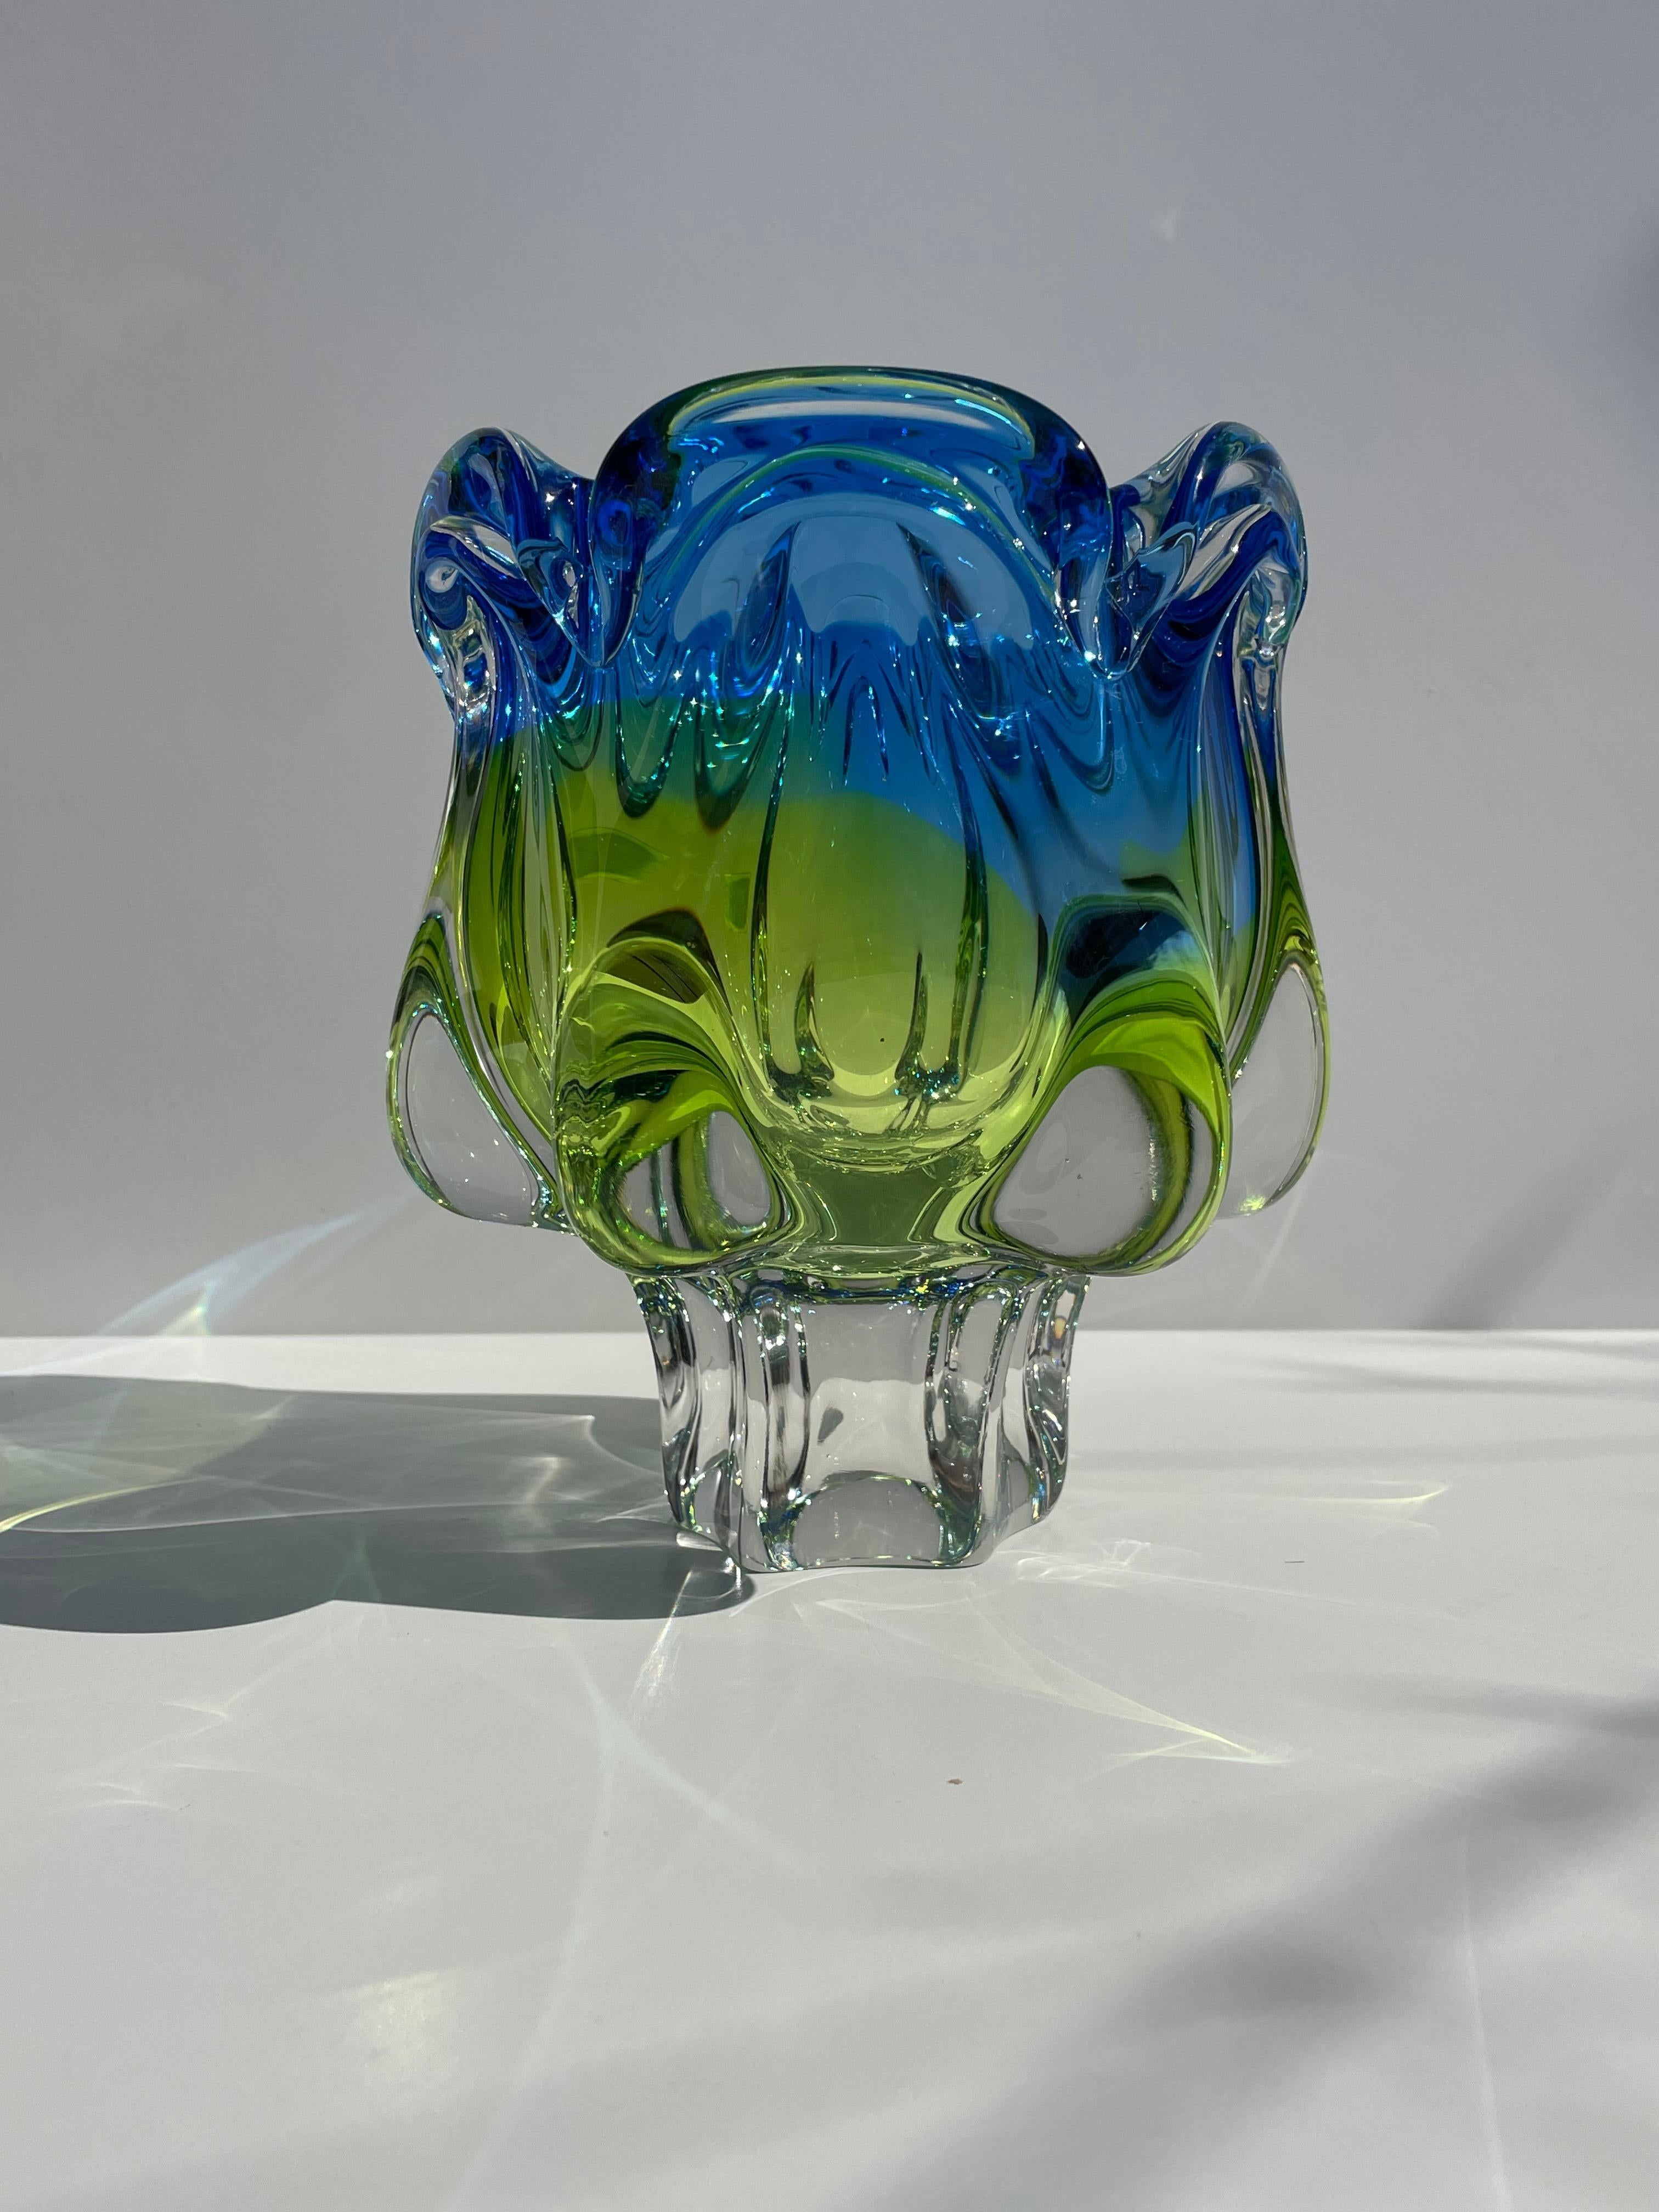 Bohemian large and heavy mouthblown decorative encased crystal art vase in bright blue, green and yellow colors. Soft organic shapes on clear solid base. Manufactured by Bohemia Crystal in Czechoslovakia in the 1970s. Original label on one side.